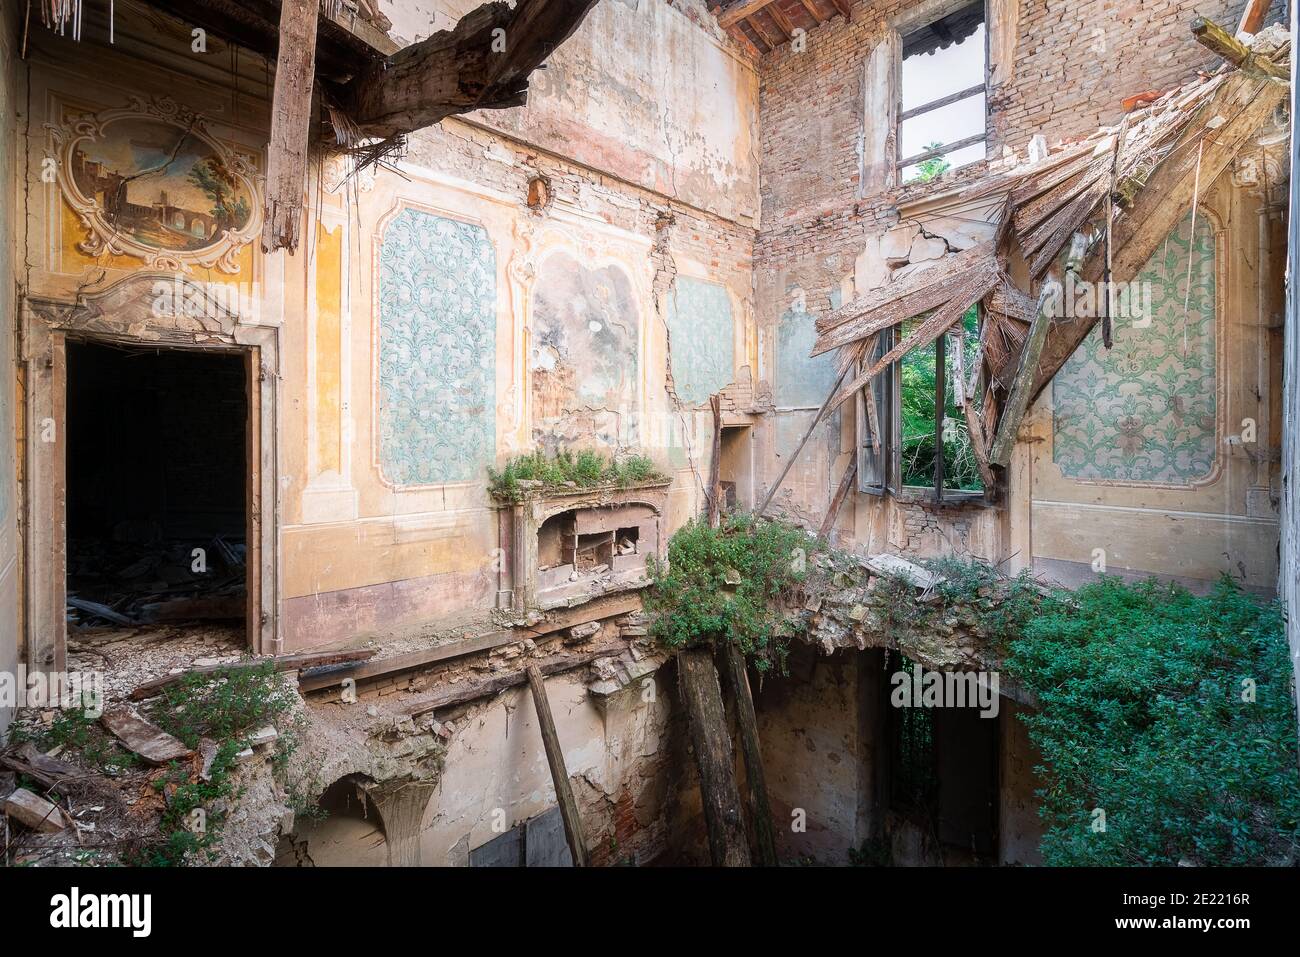 Stunning Room in an Abandoned and Derelict Building Stock Photo